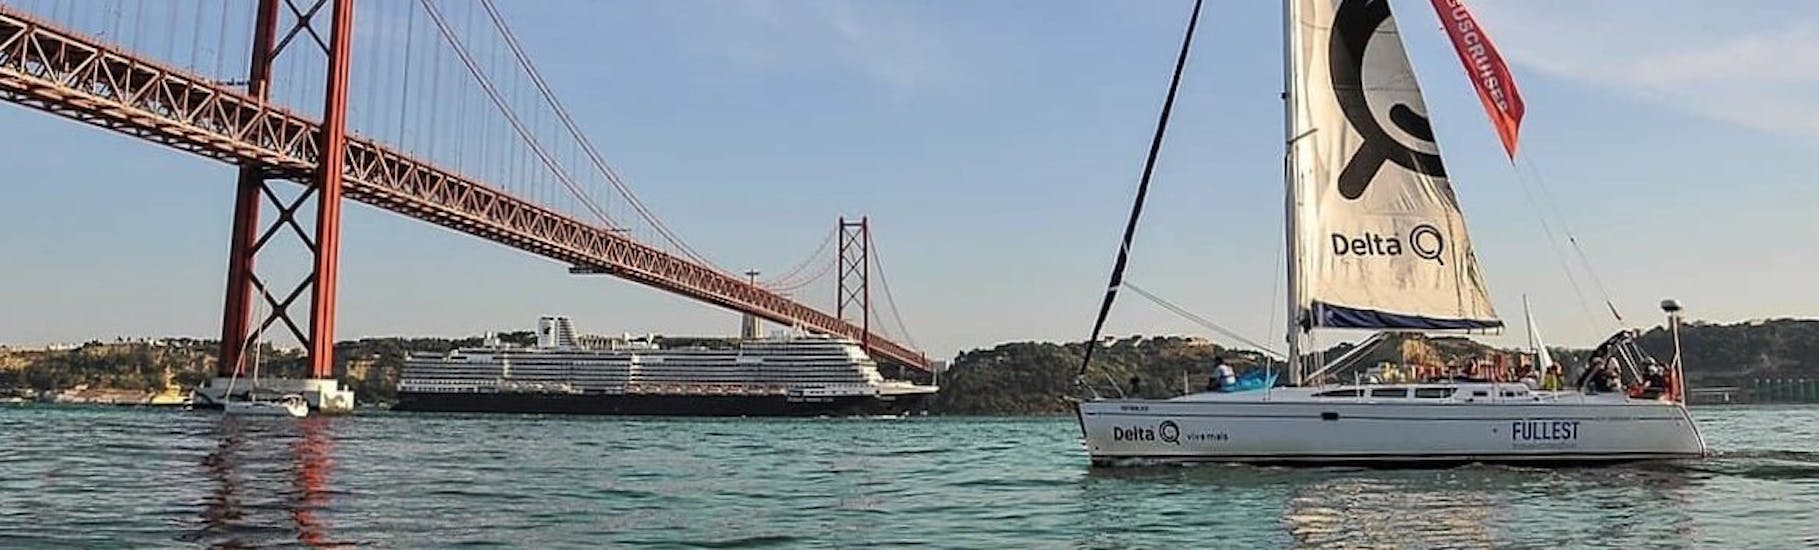 The beautiful city of Lisbon as background, while an elegant sailboat sails to a nearby beach during a private boat trip from Lisbon with Taguscruises Lisbon.